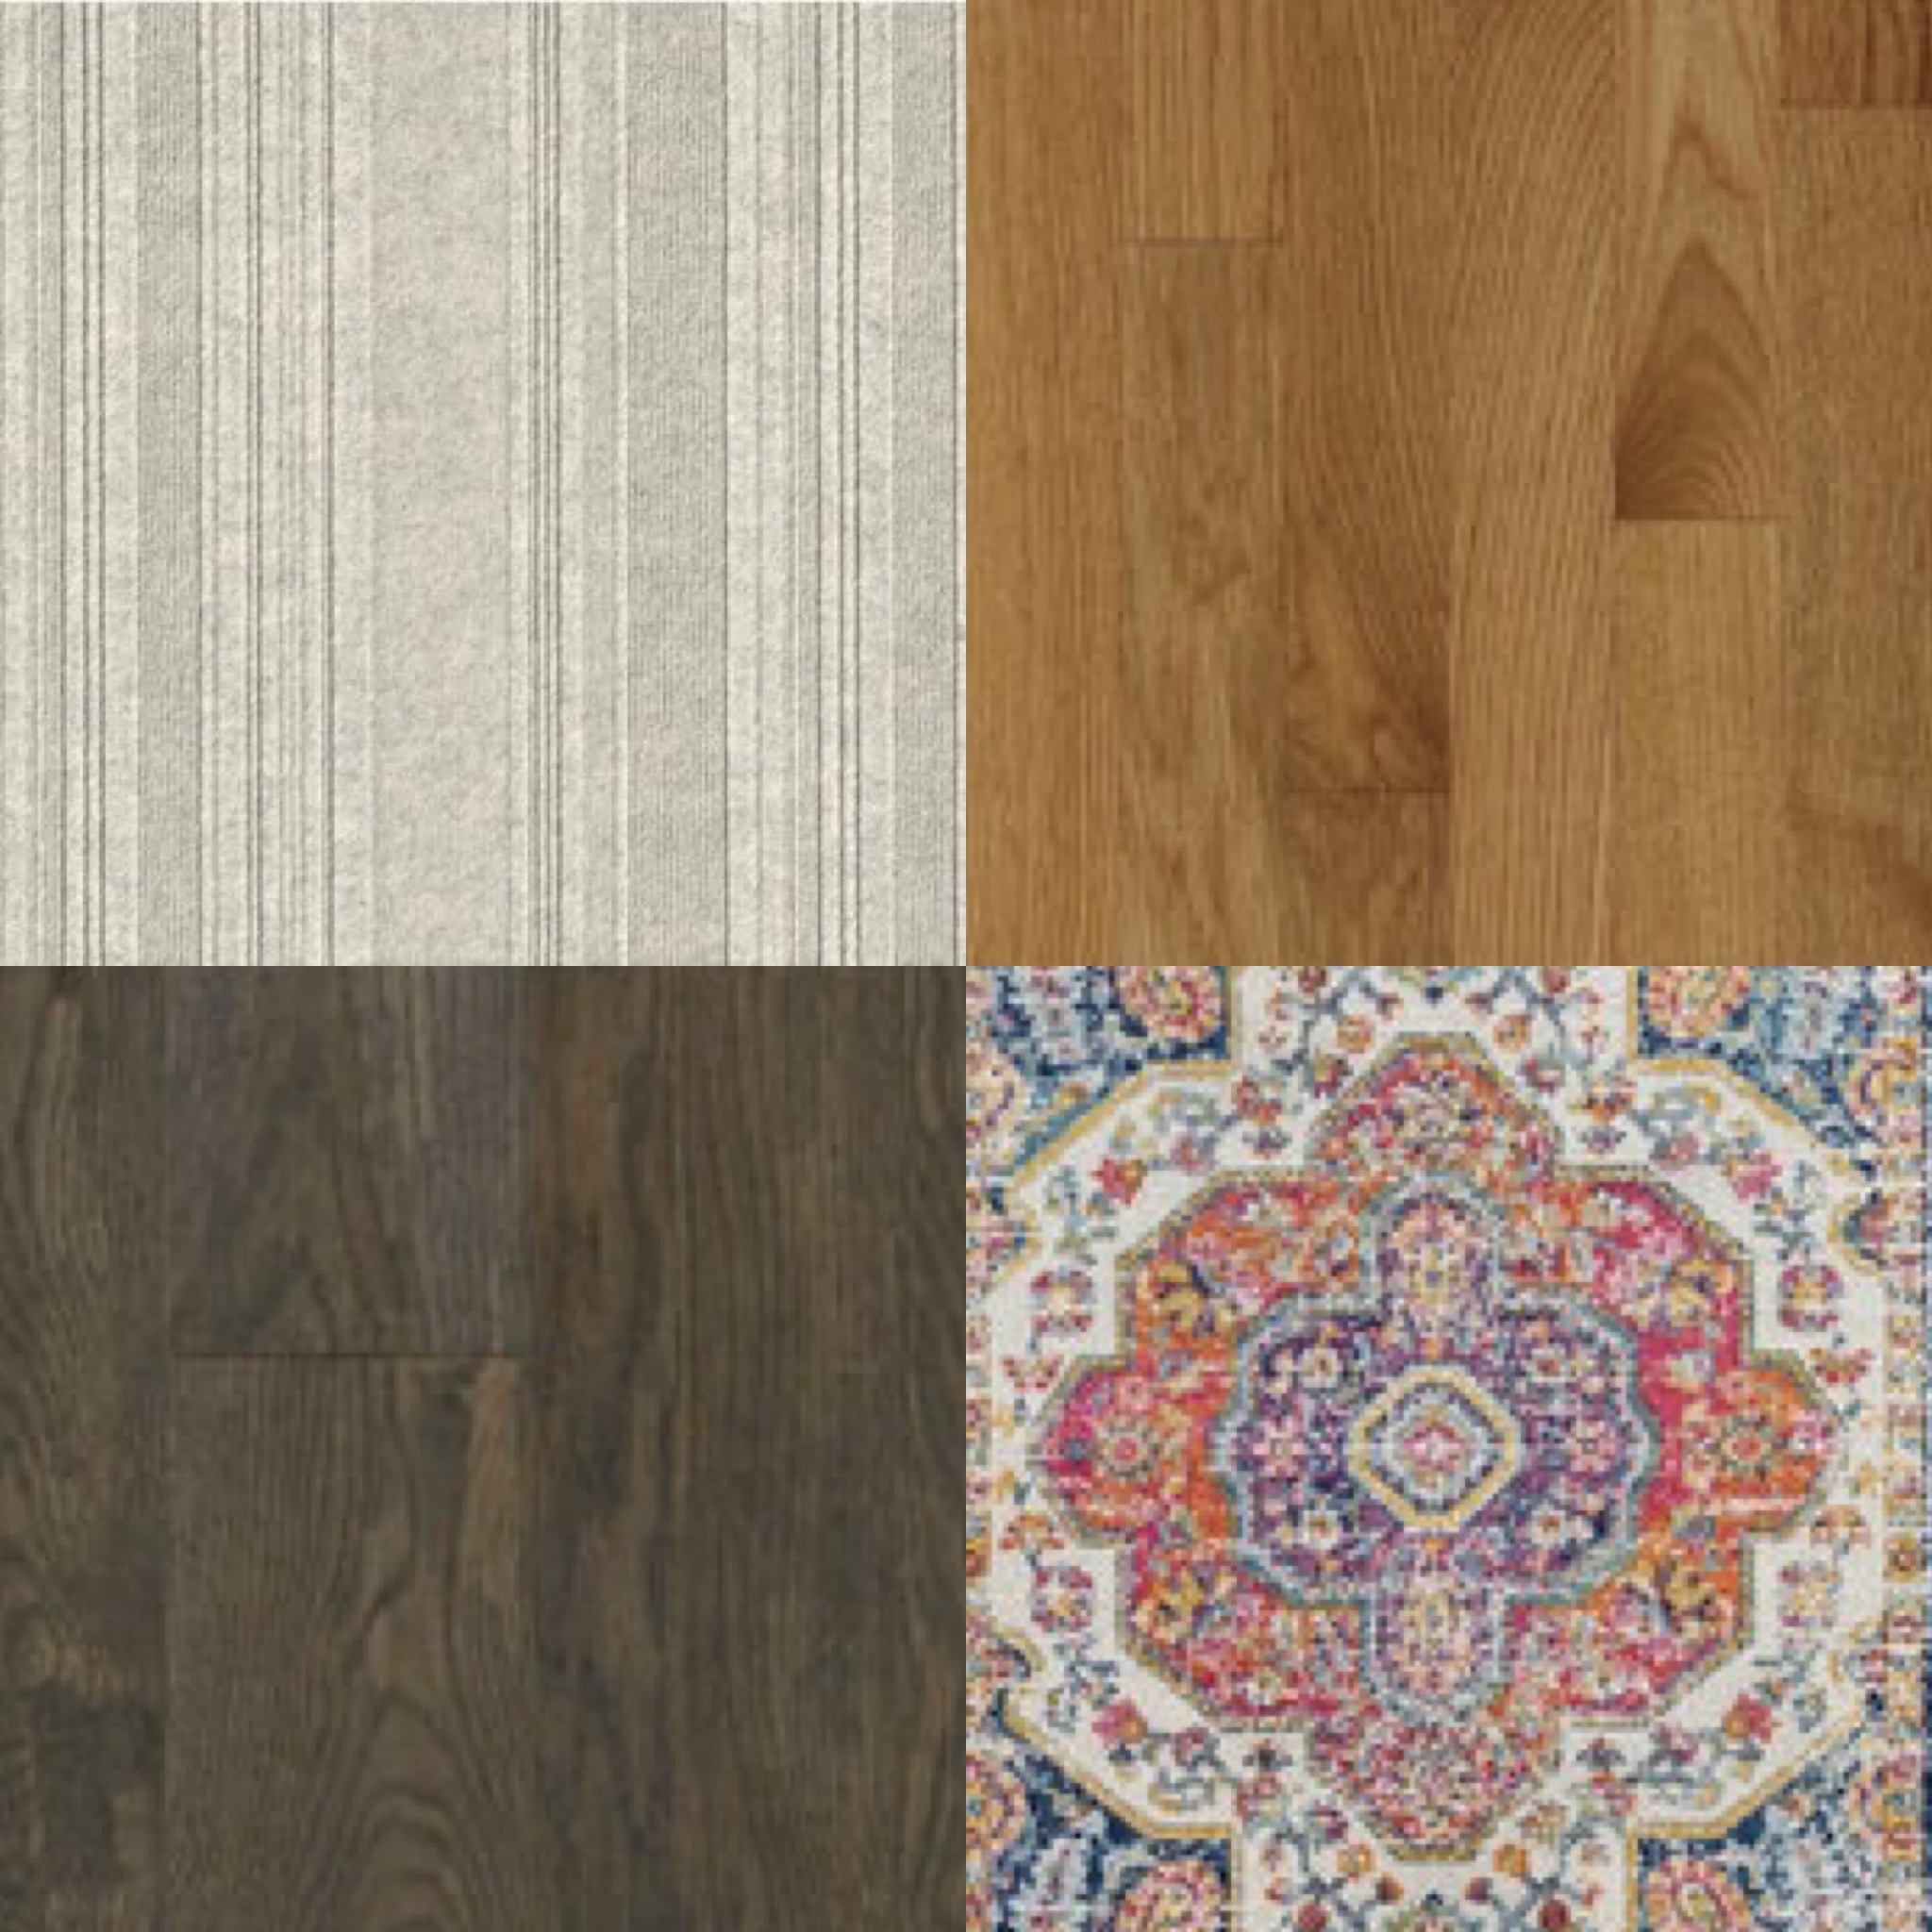 Tackle Your Flooring Project for Less at Bud’s.